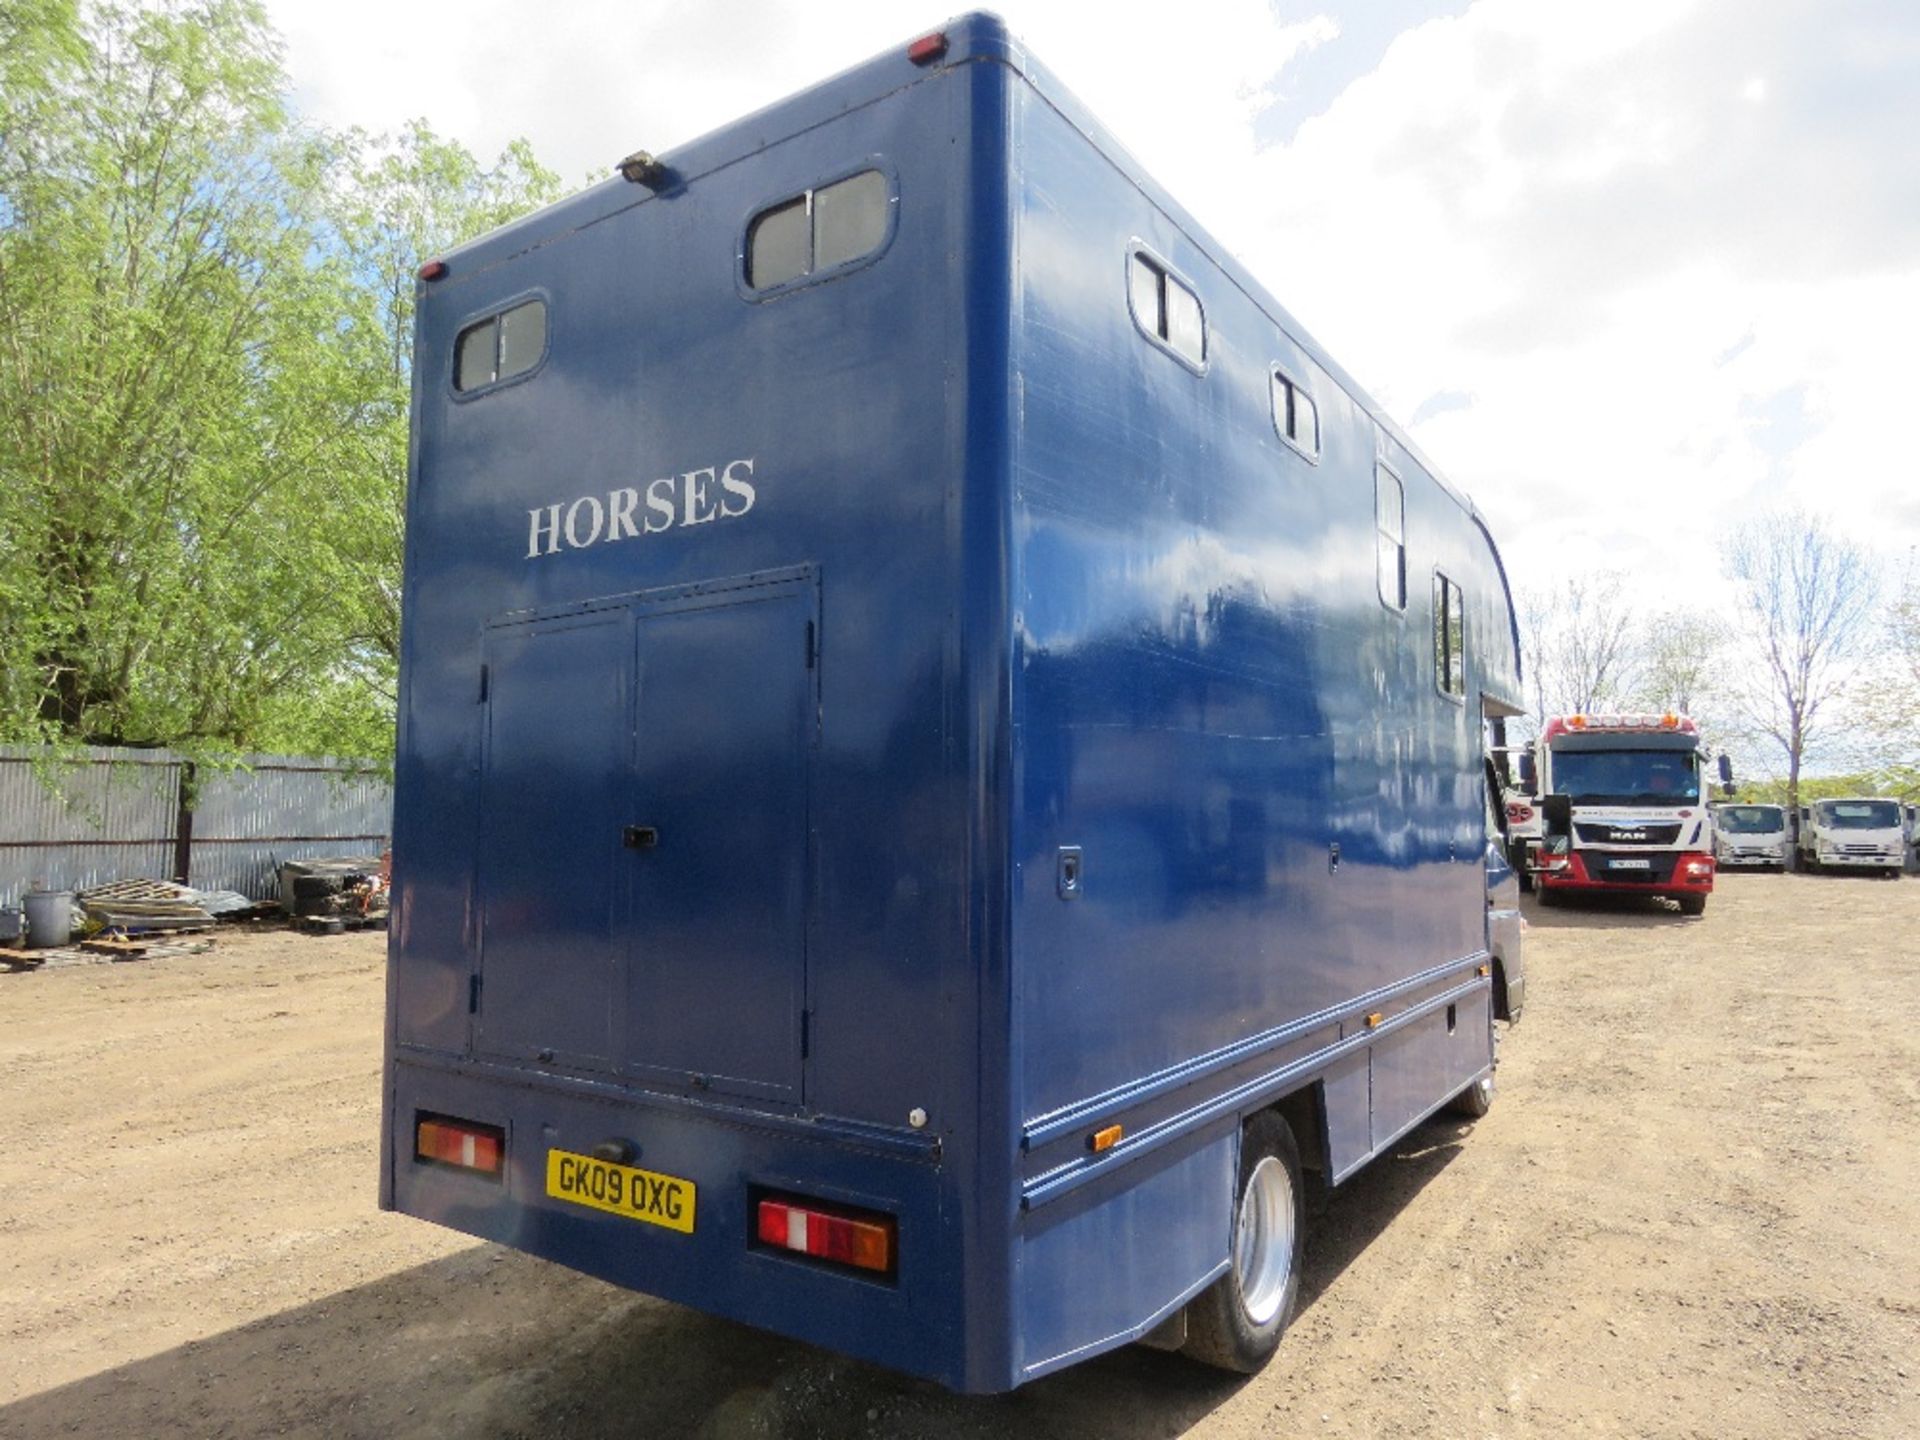 MITSUBISHI CANTER HORSE BOX LORRY REG:GK09 OXG. V5 AND PLATING CERTIFICATE IN OFFICE. MOT EXPIRED. - Bild 8 aus 24